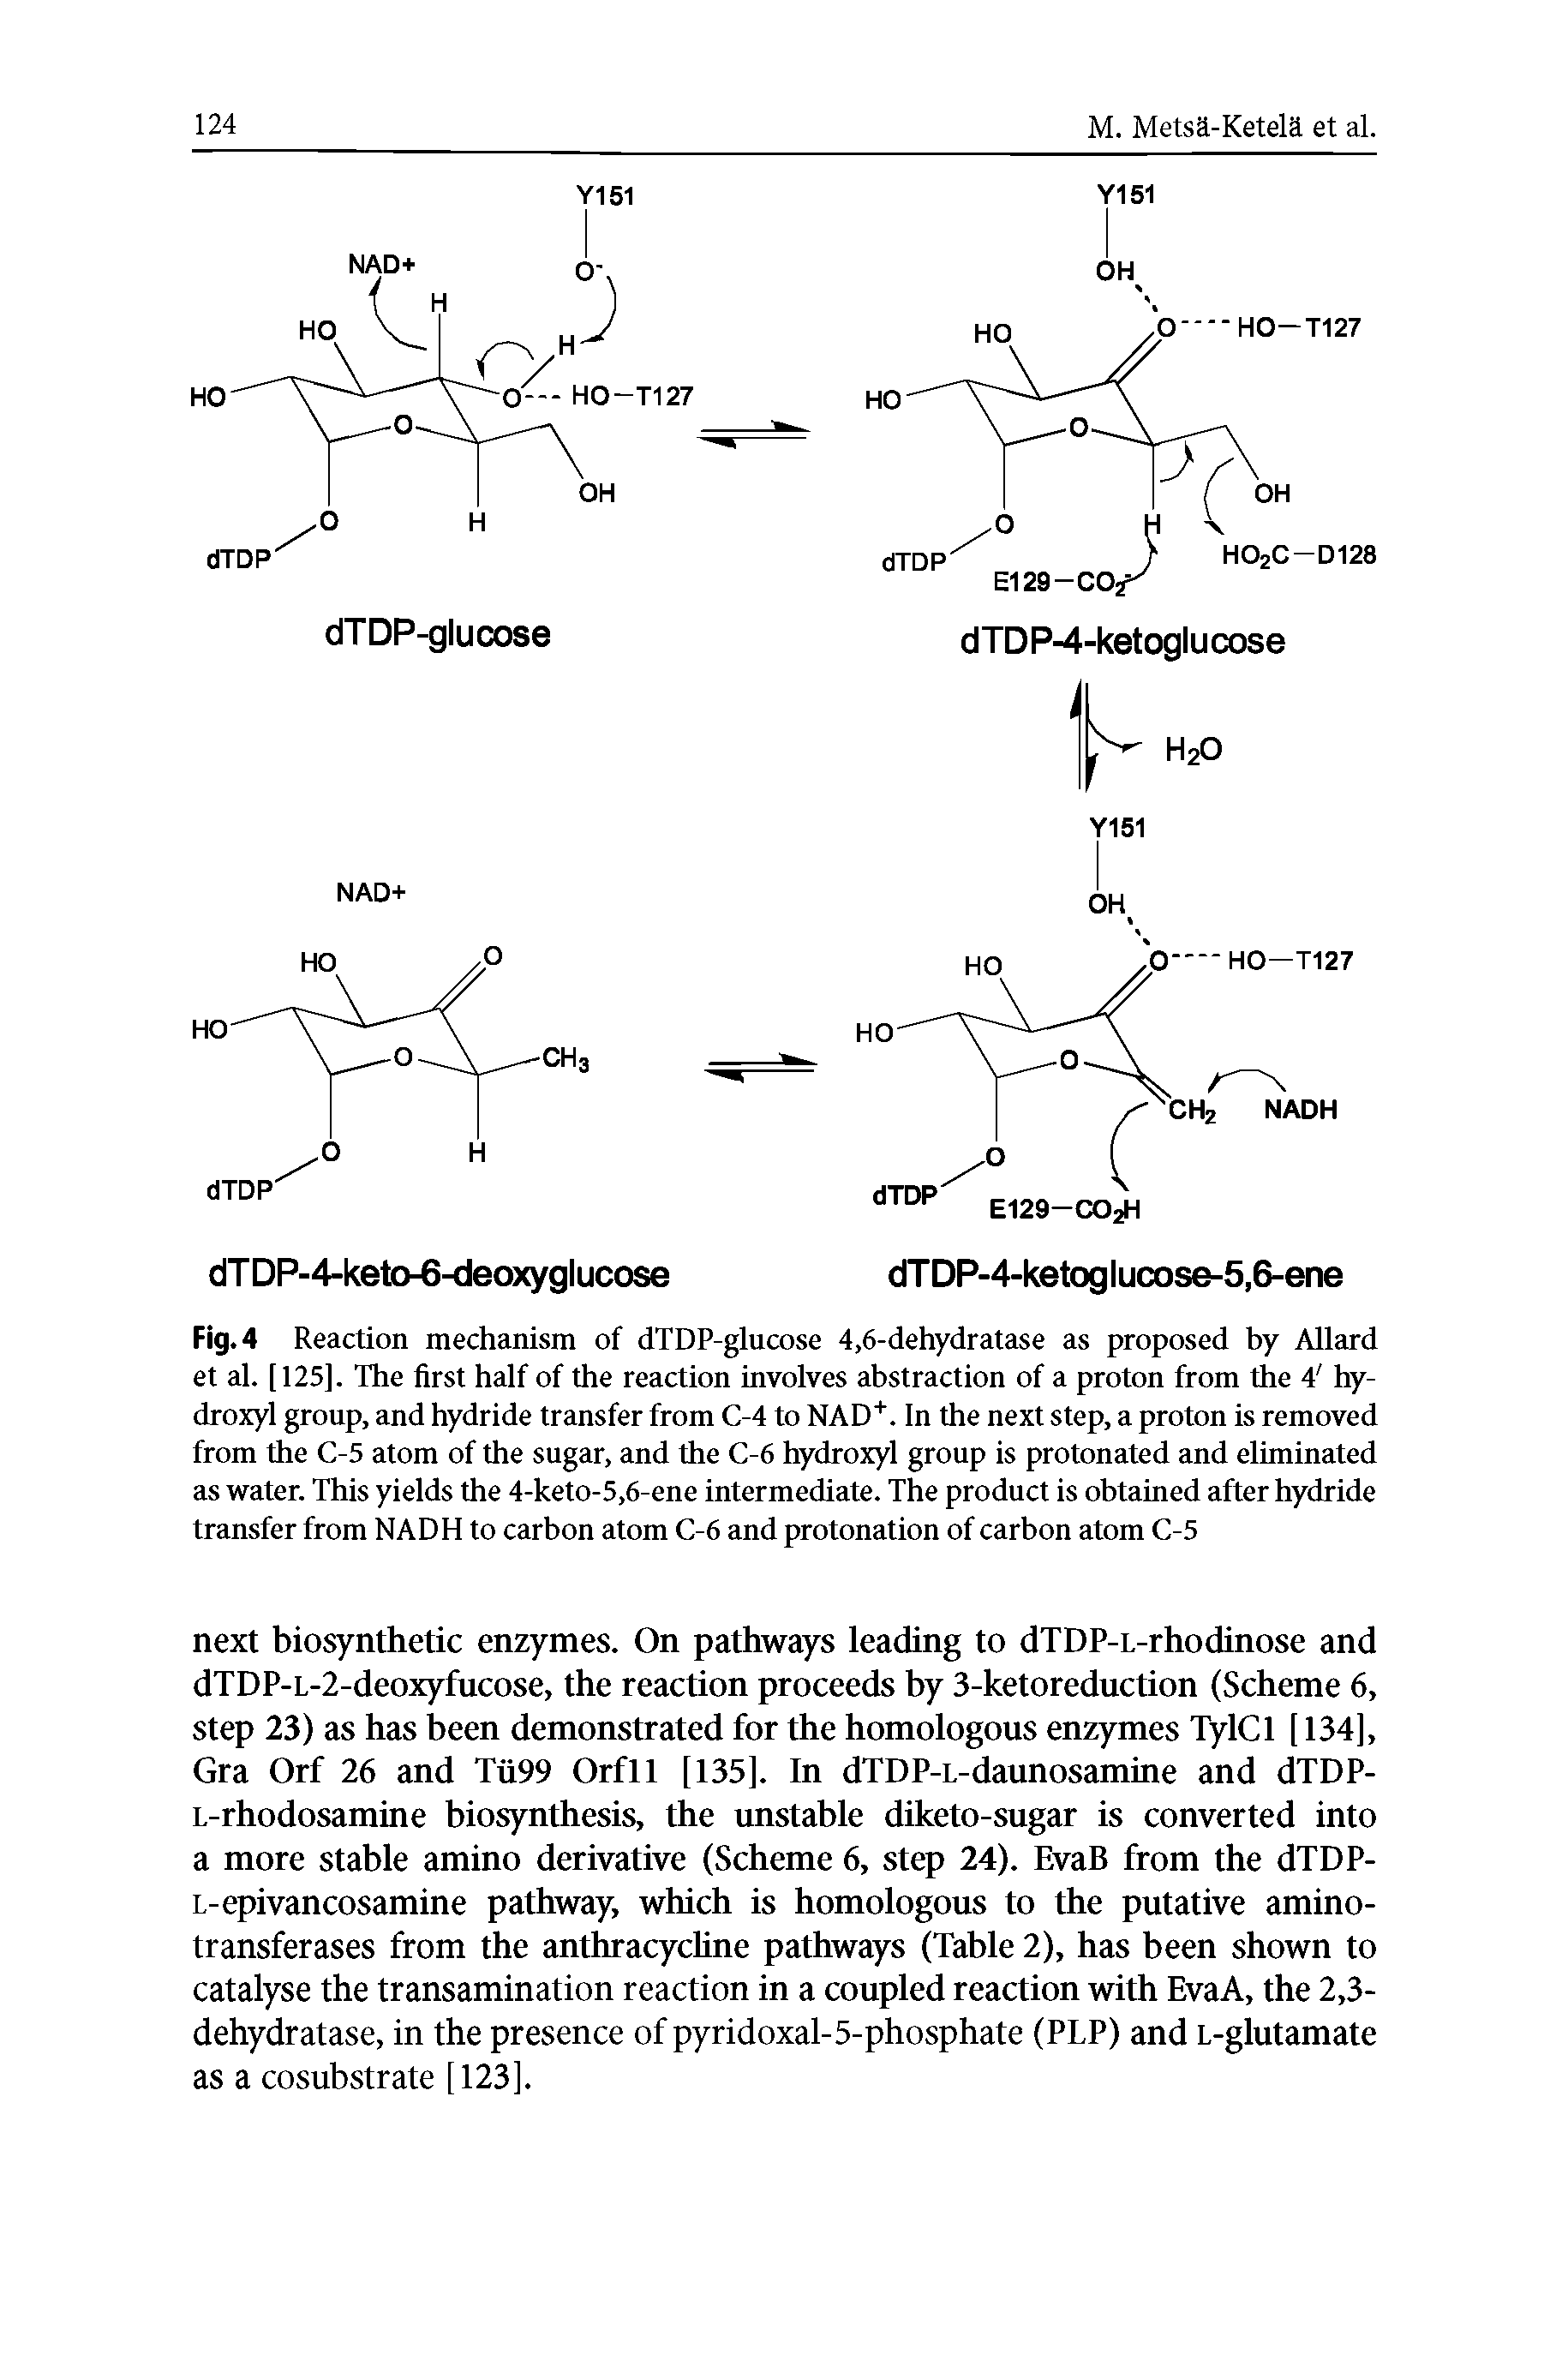 Fig. 4 Reaction mechanism of dTDP-glucose 4,6-dehydratase as proposed by Allard et al. [125], The first half of the reaction involves abstraction of a proton from the 4 hydroxyl group, and hydride transfer from C-4 to NAD. In the next step, a proton is removed from the C-5 atom of the sugar, and the C-6 hydroxyl group is protonated and eliminated as water. This yields the 4-keto-5,6-ene intermediate. The product is obtained after hydride transfer from NADH to carbon atom C-6 and protonation of carbon atom C-5...